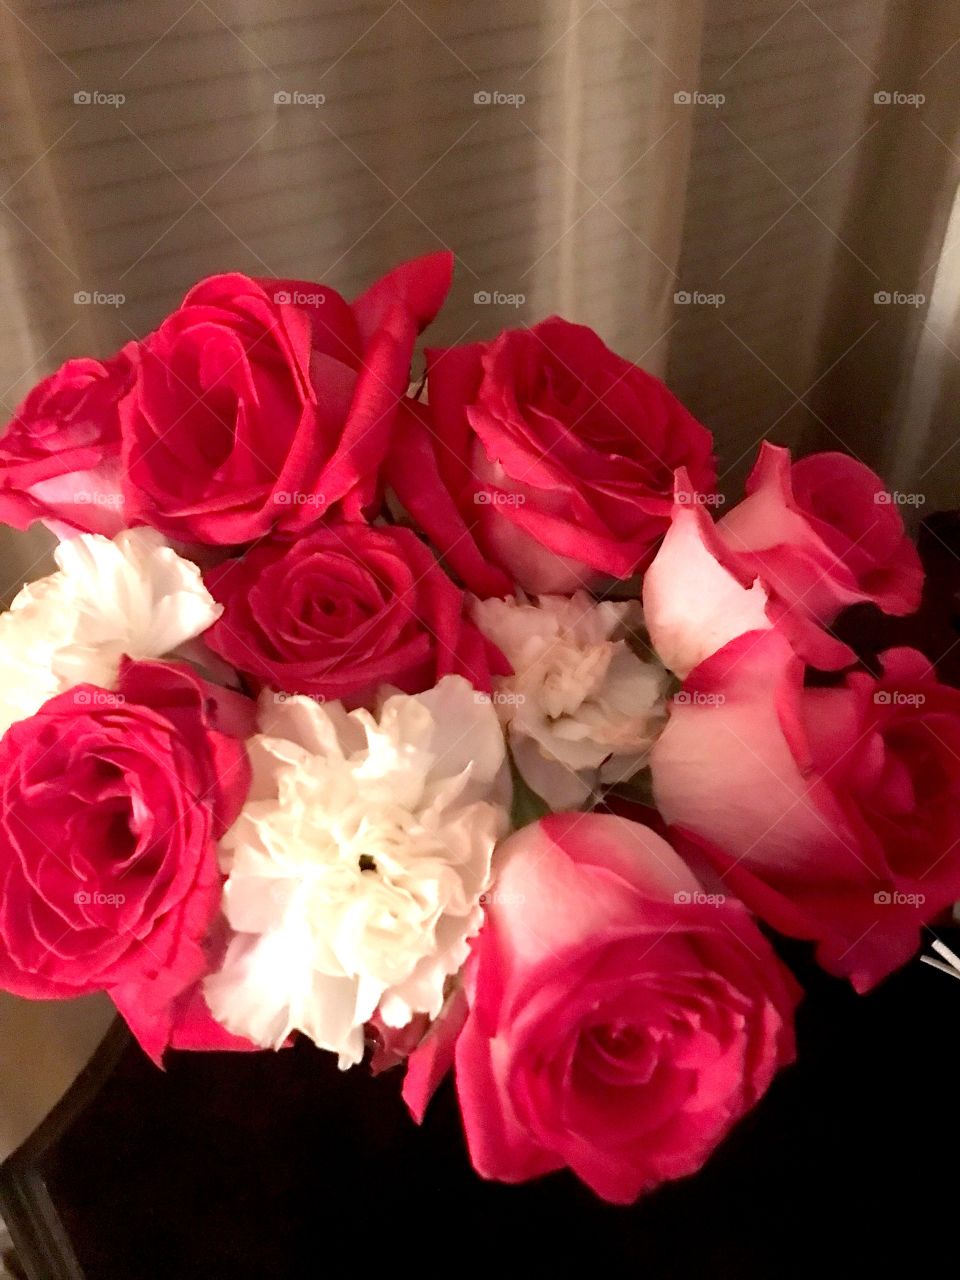 Bright pink roses and white carnations